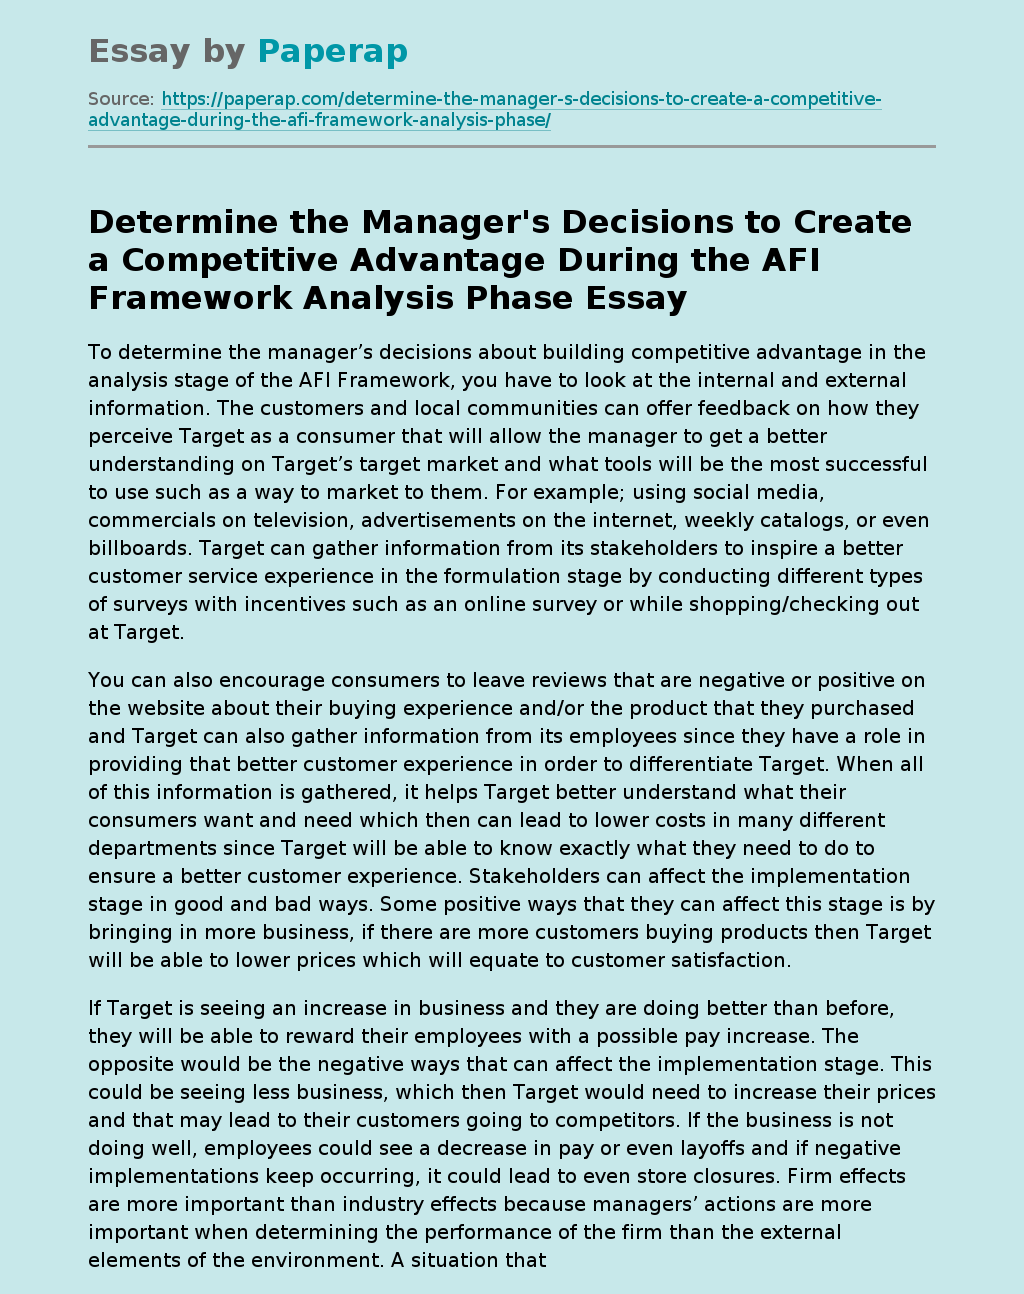 Determine the Manager's Decisions to Create a Competitive Advantage During the AFI Framework Analysis Phase